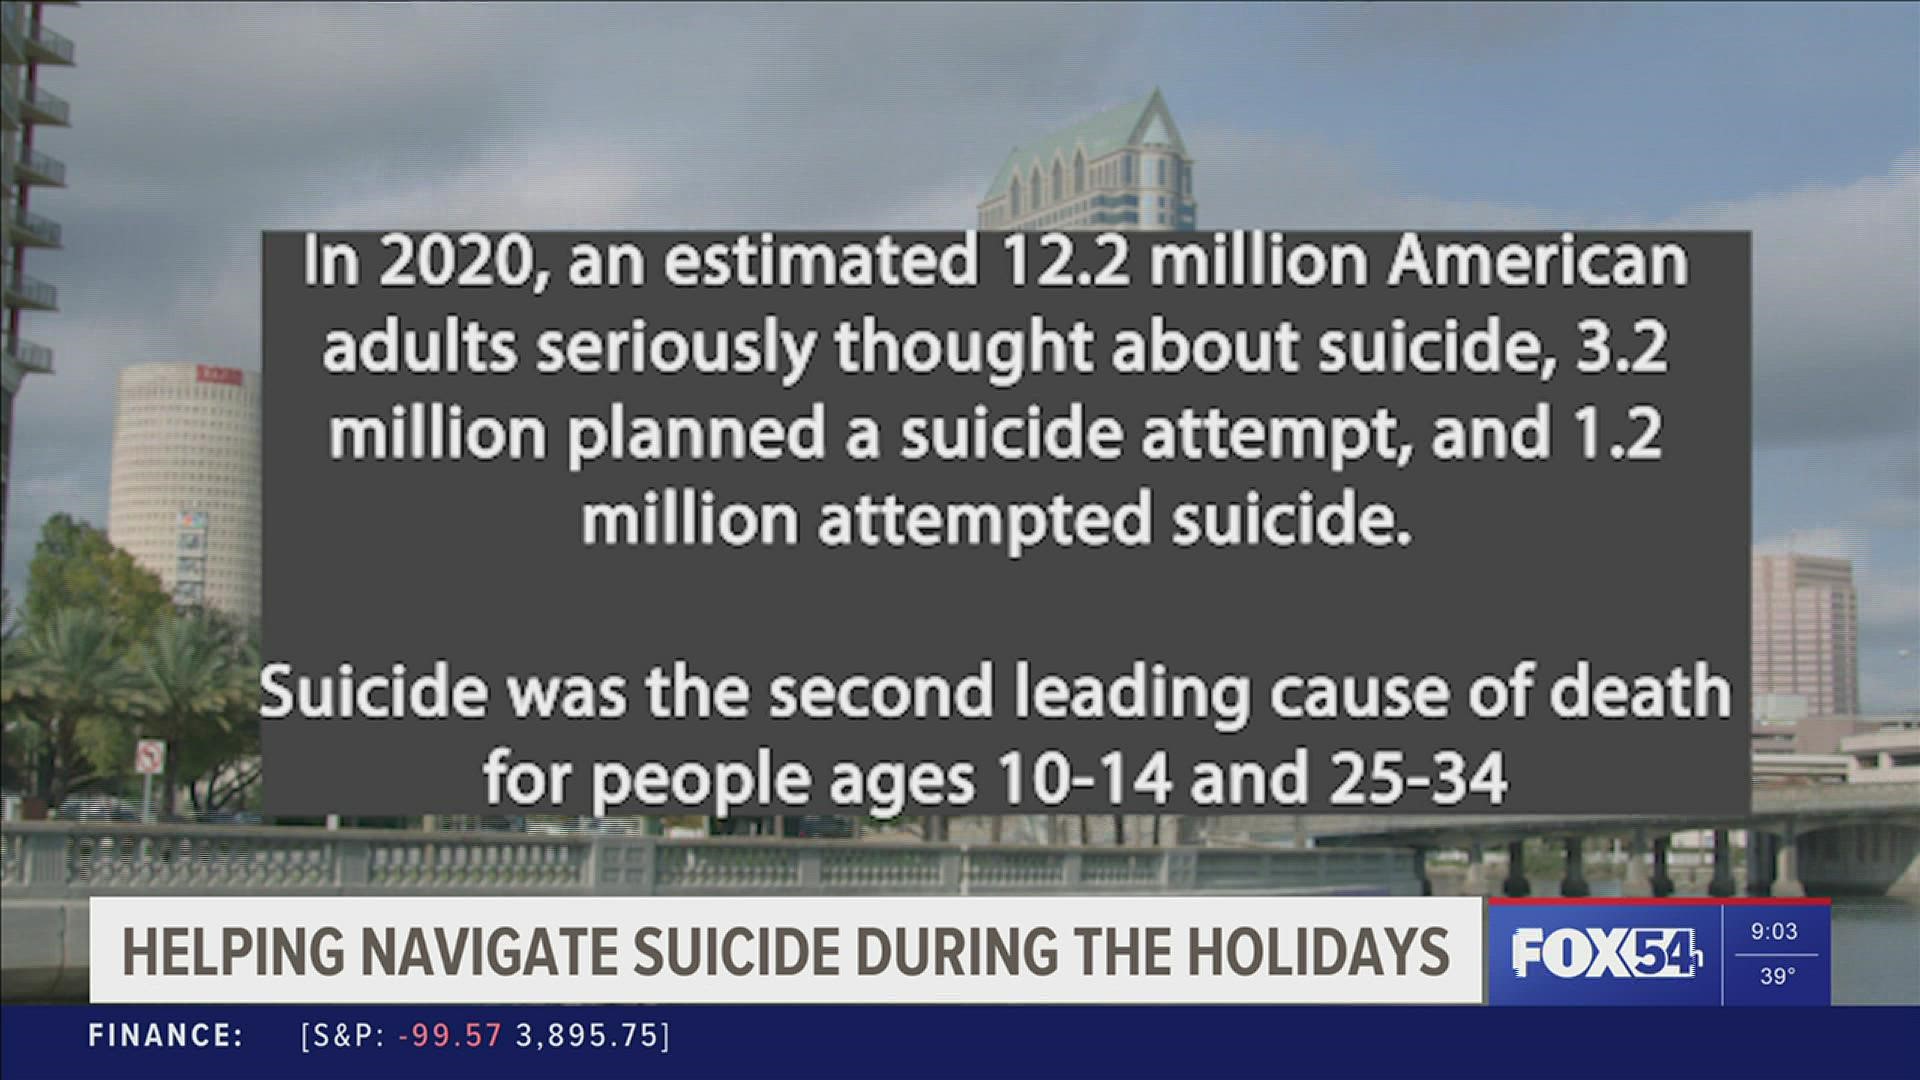 While the CDC numbers report suicide rates are higher in spring and fall, this time of year can also be hard on those struggling mentally.